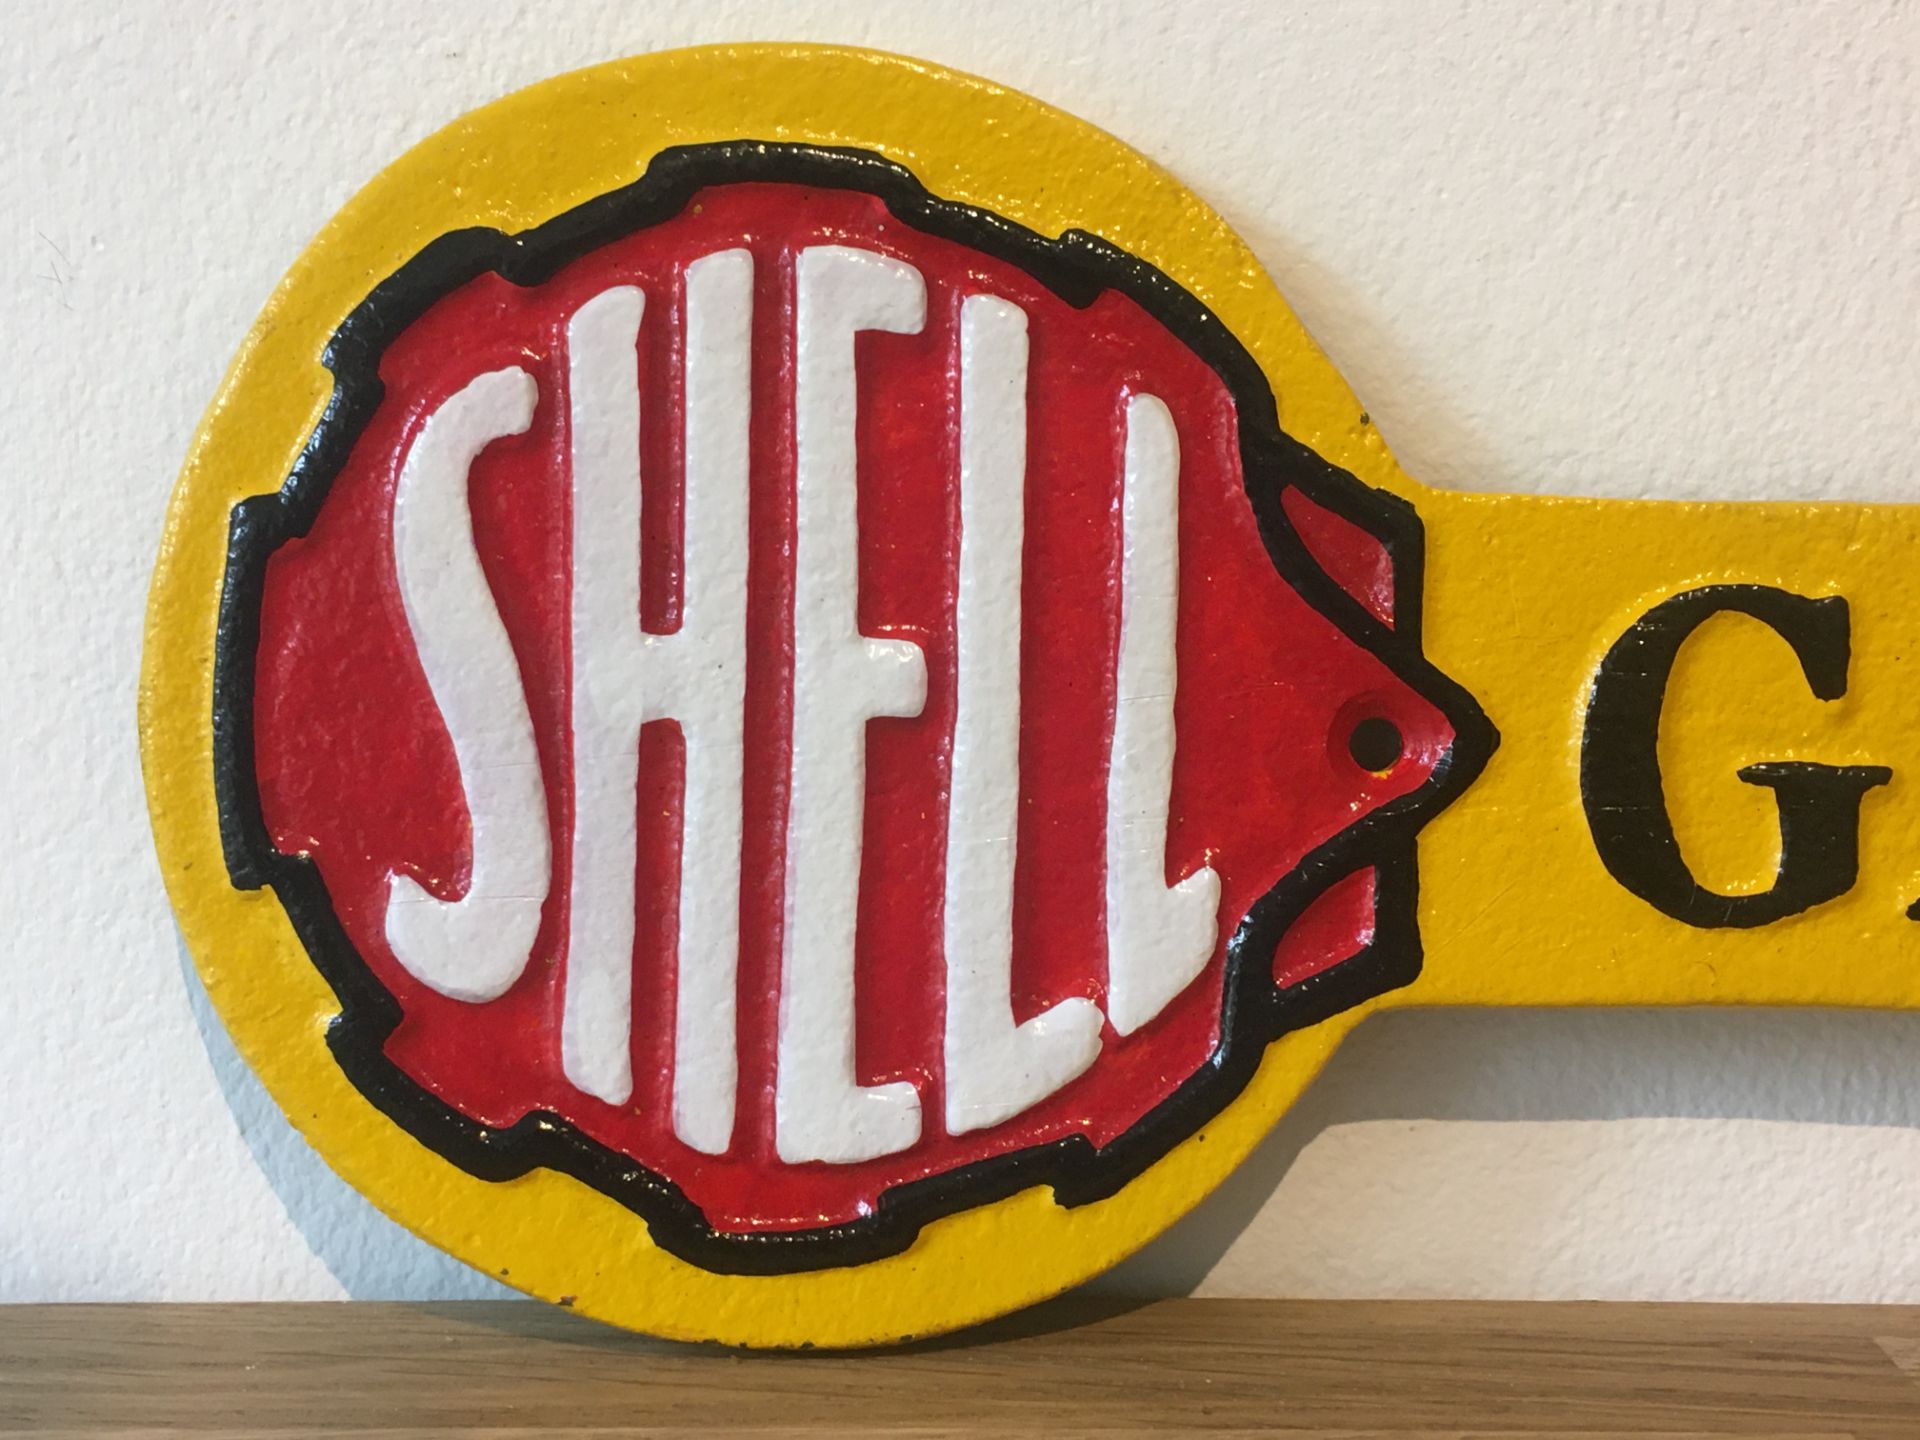 Cast Iron Shell Oil Garage Arrow Sign - Image 2 of 3